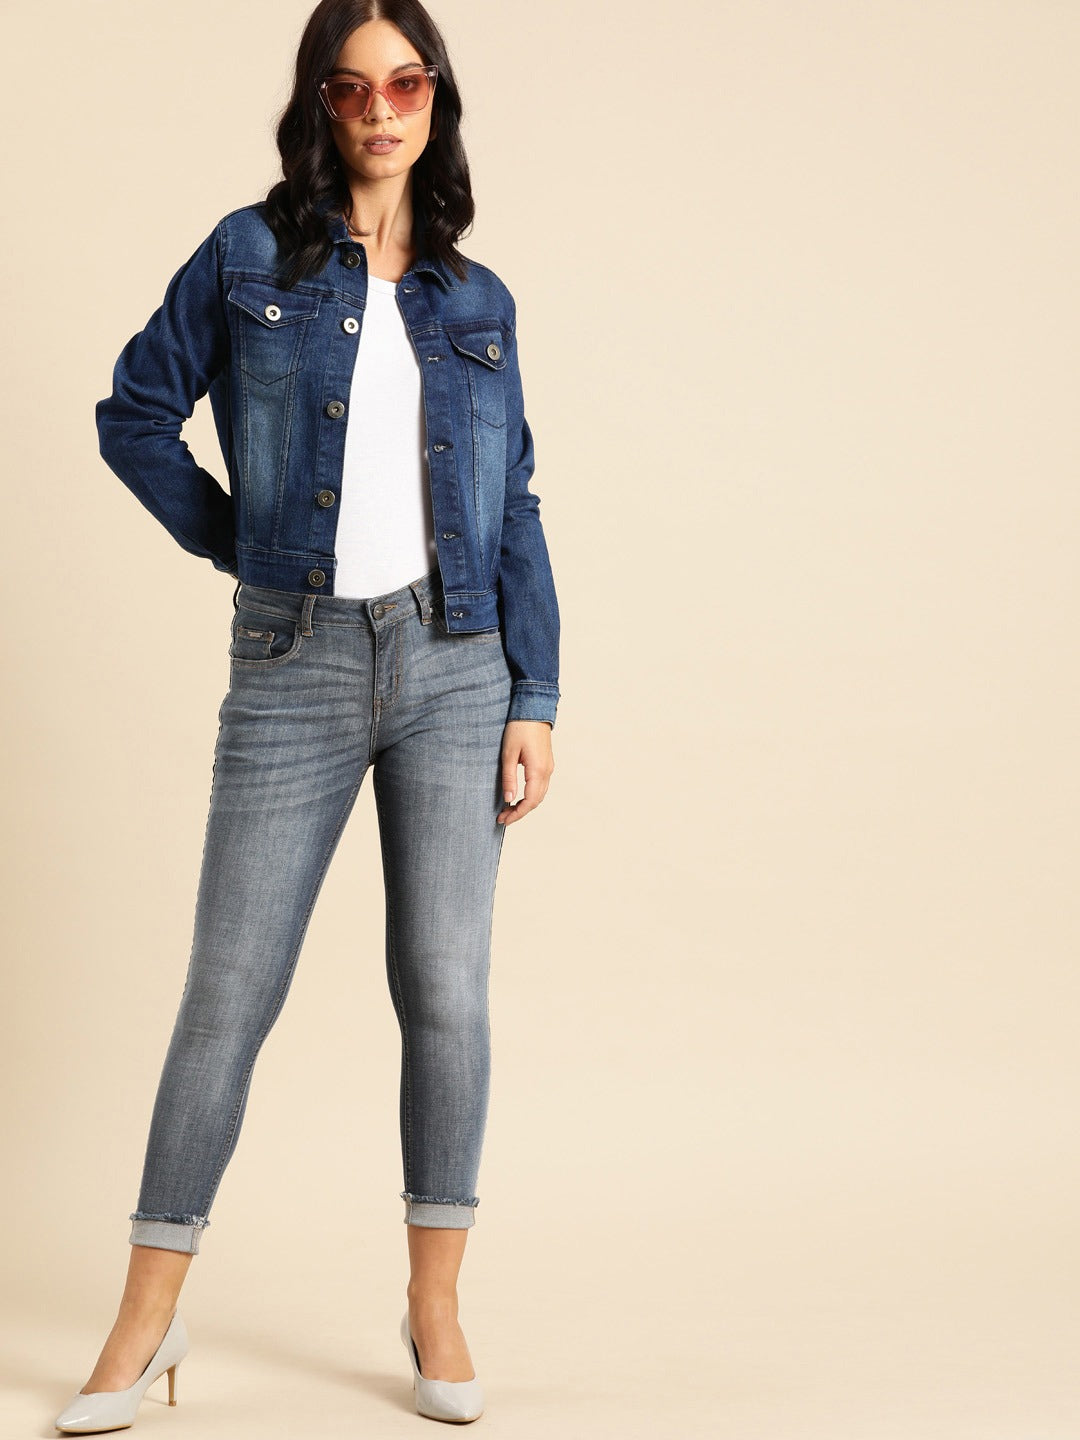 Stylish blue denim jacket and gray jeans worn by young woman in casual yet chic outfit, showcasing fashionable accessories including sunglasses.